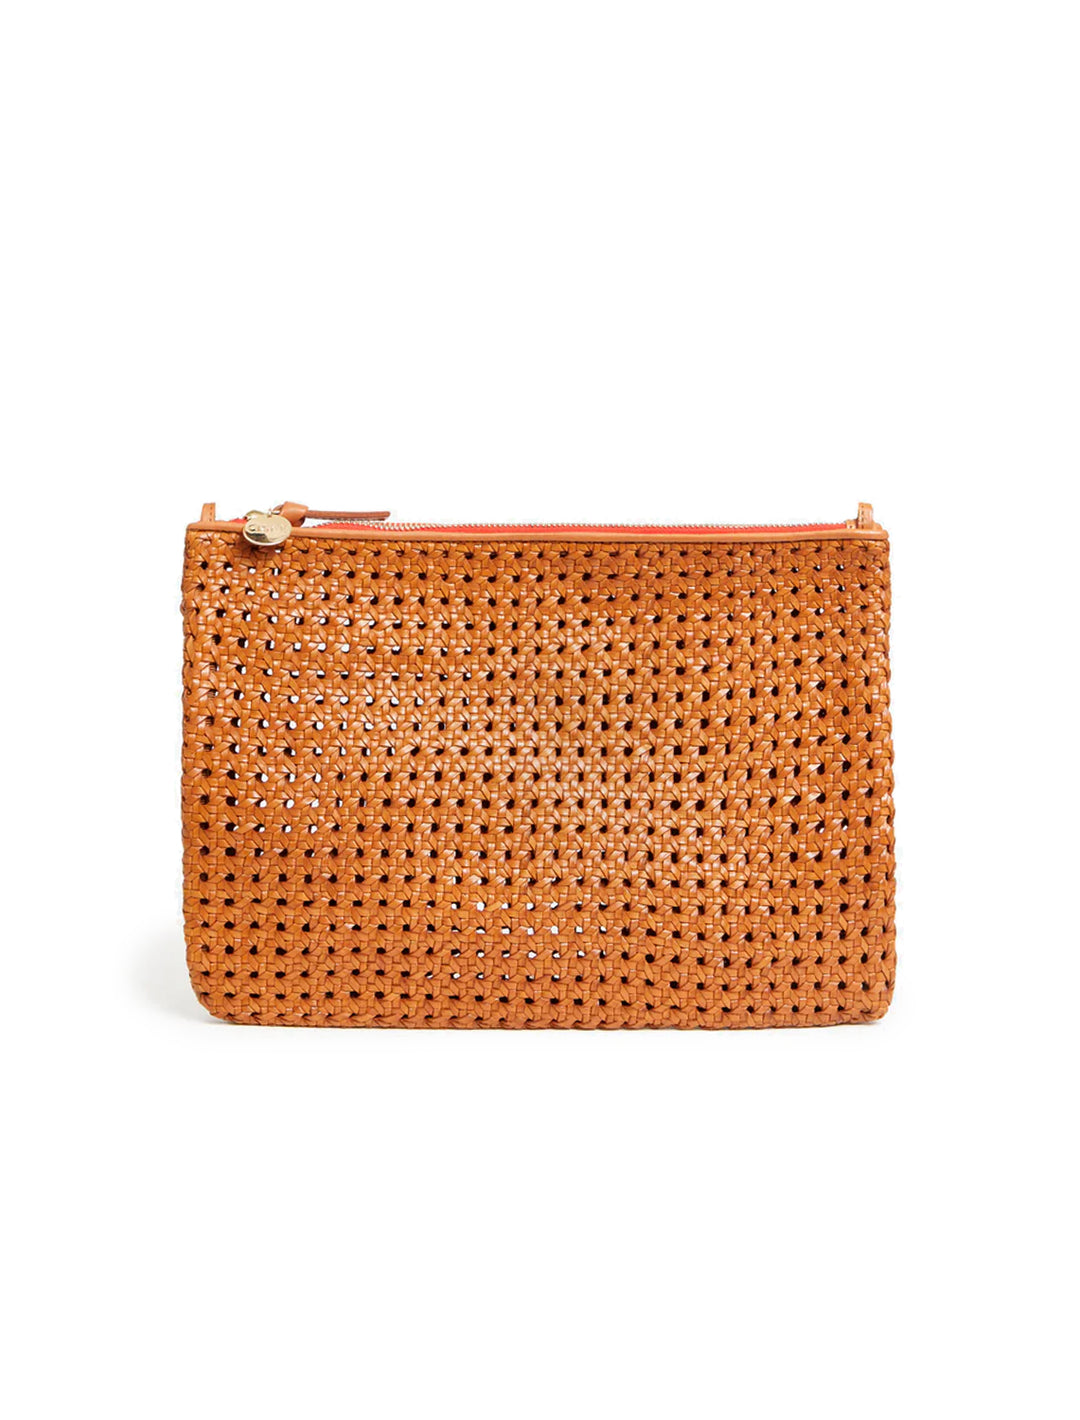 Clare V. Coin Clutch